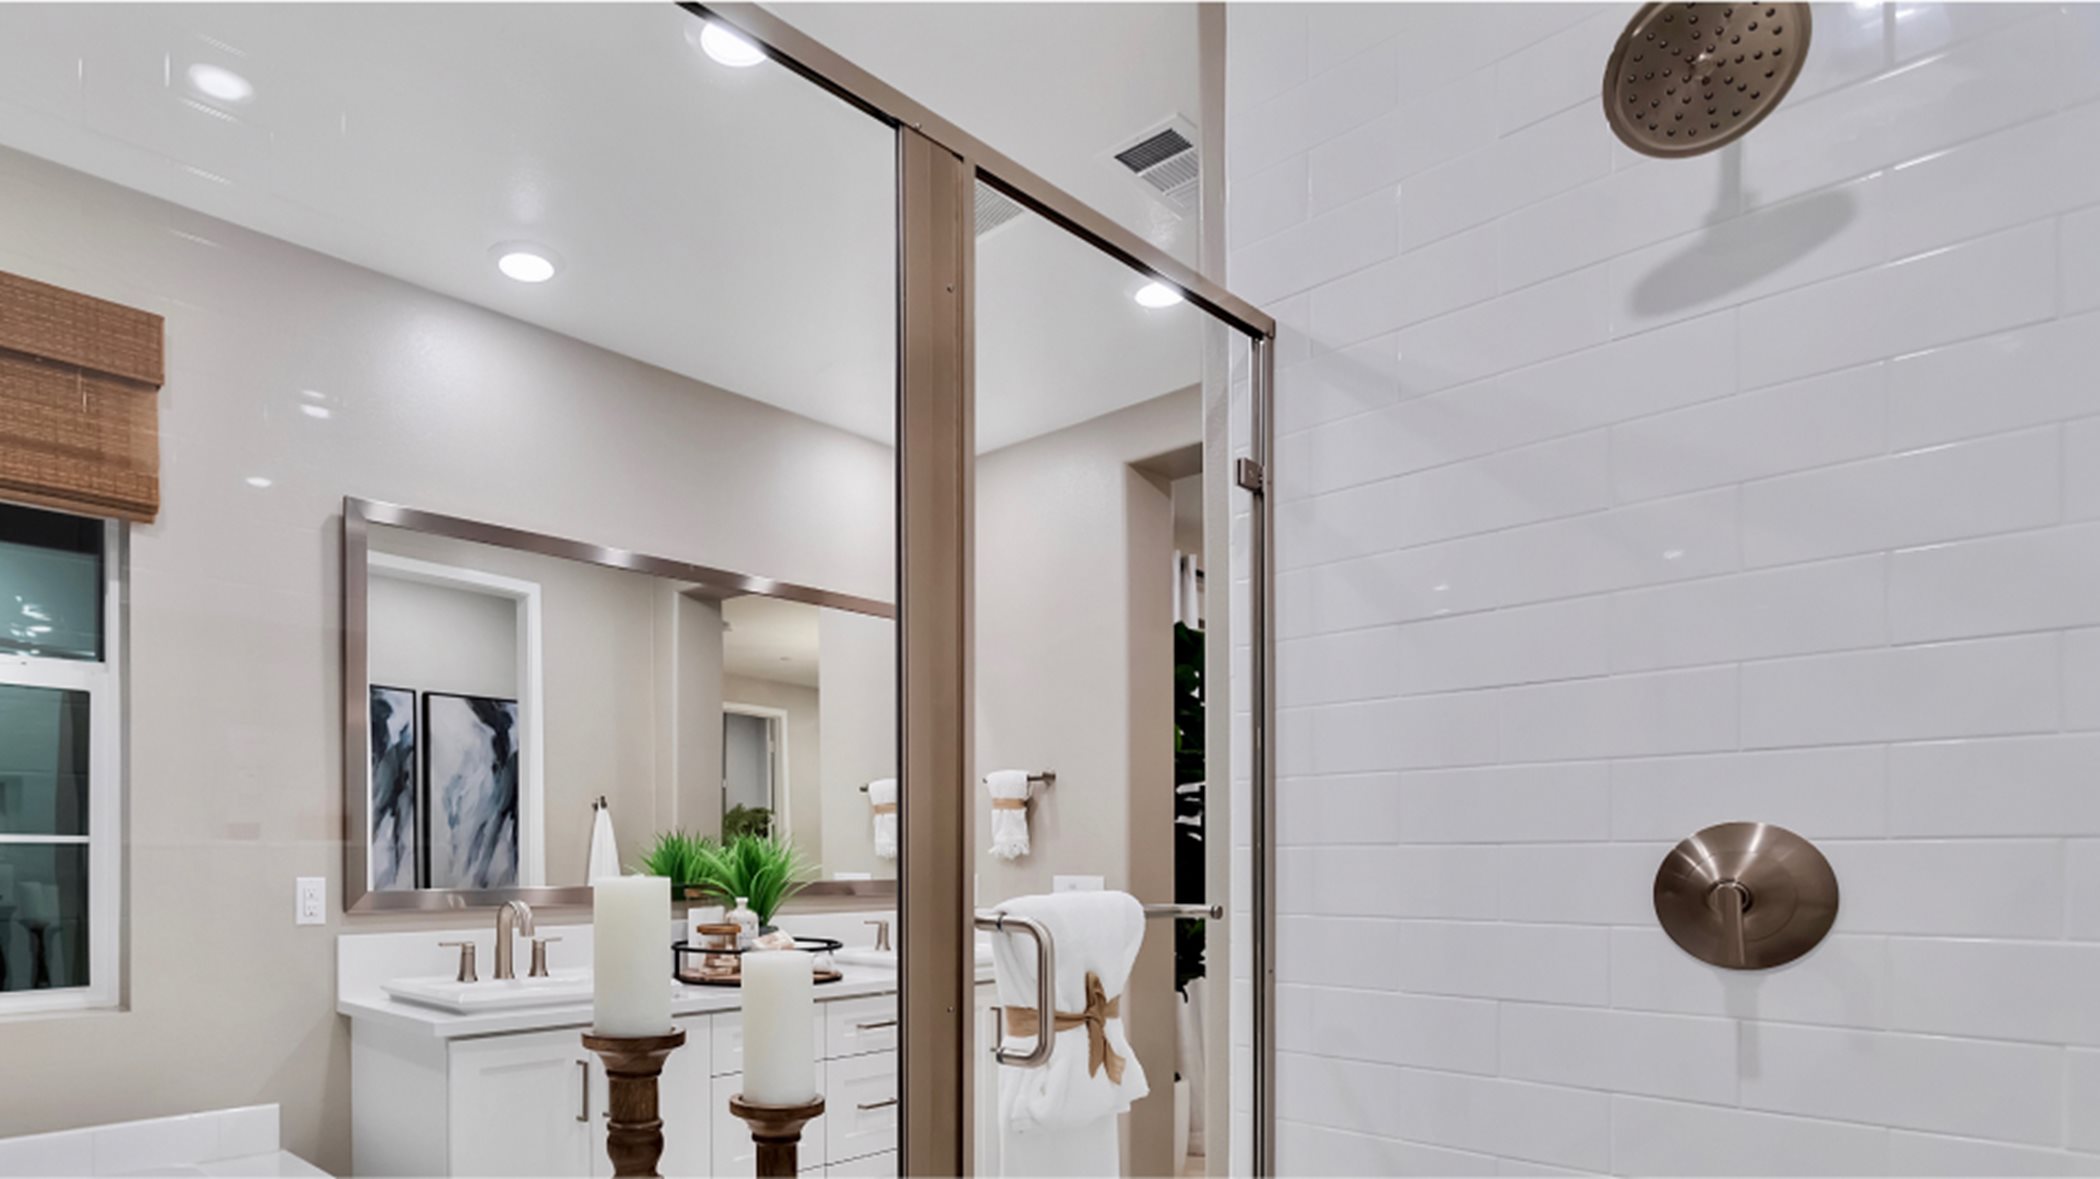 A glass-enclosed shower with a full-height ceramic tile surround and Moen® showerhead in the owner’s suite bathroom